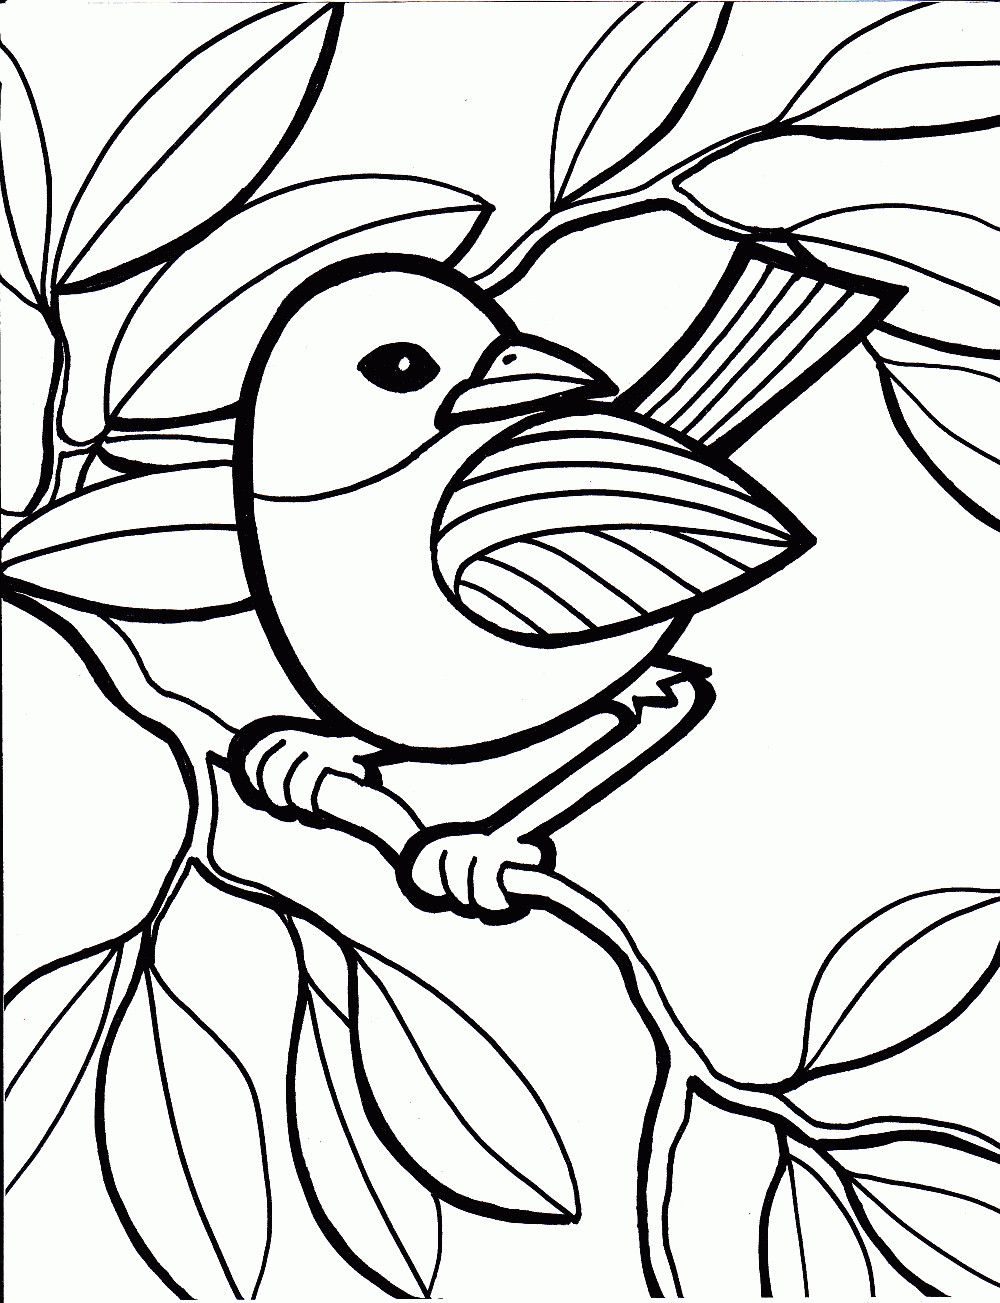 Coloring Pages For Elderly At GetDrawings Free Download